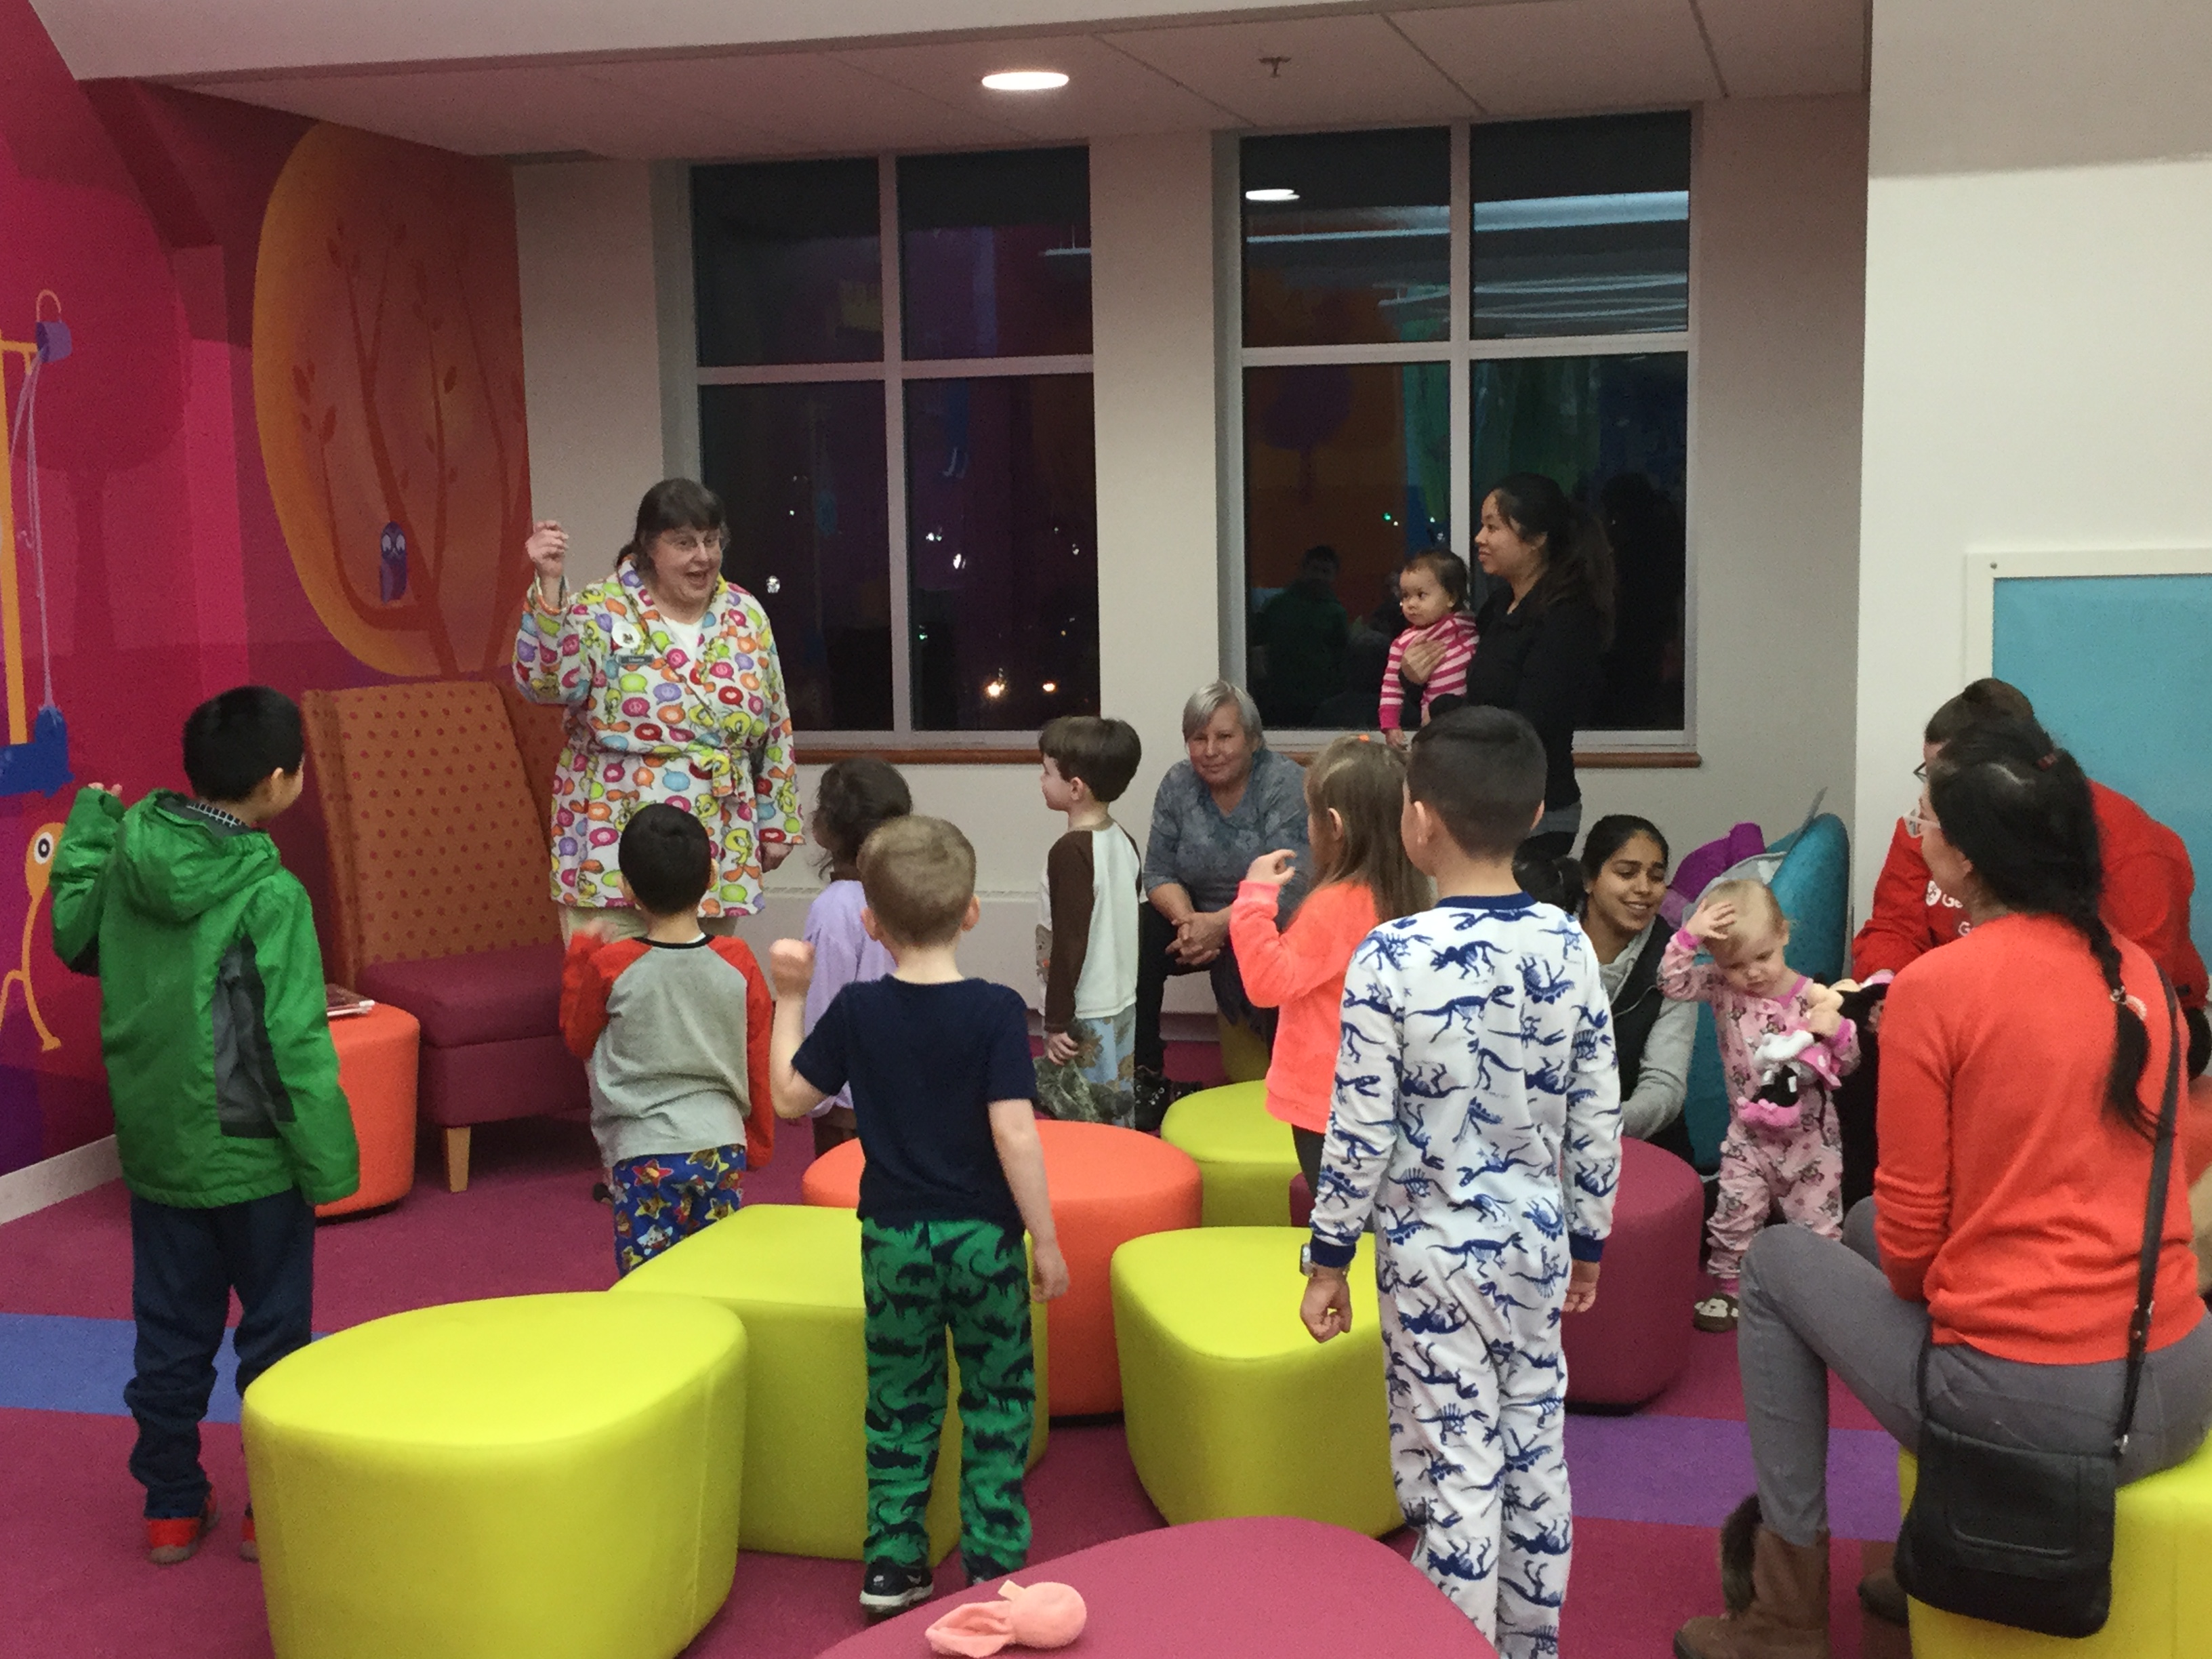 Families in Children's Room with Children's Librarian, some children in pajamas